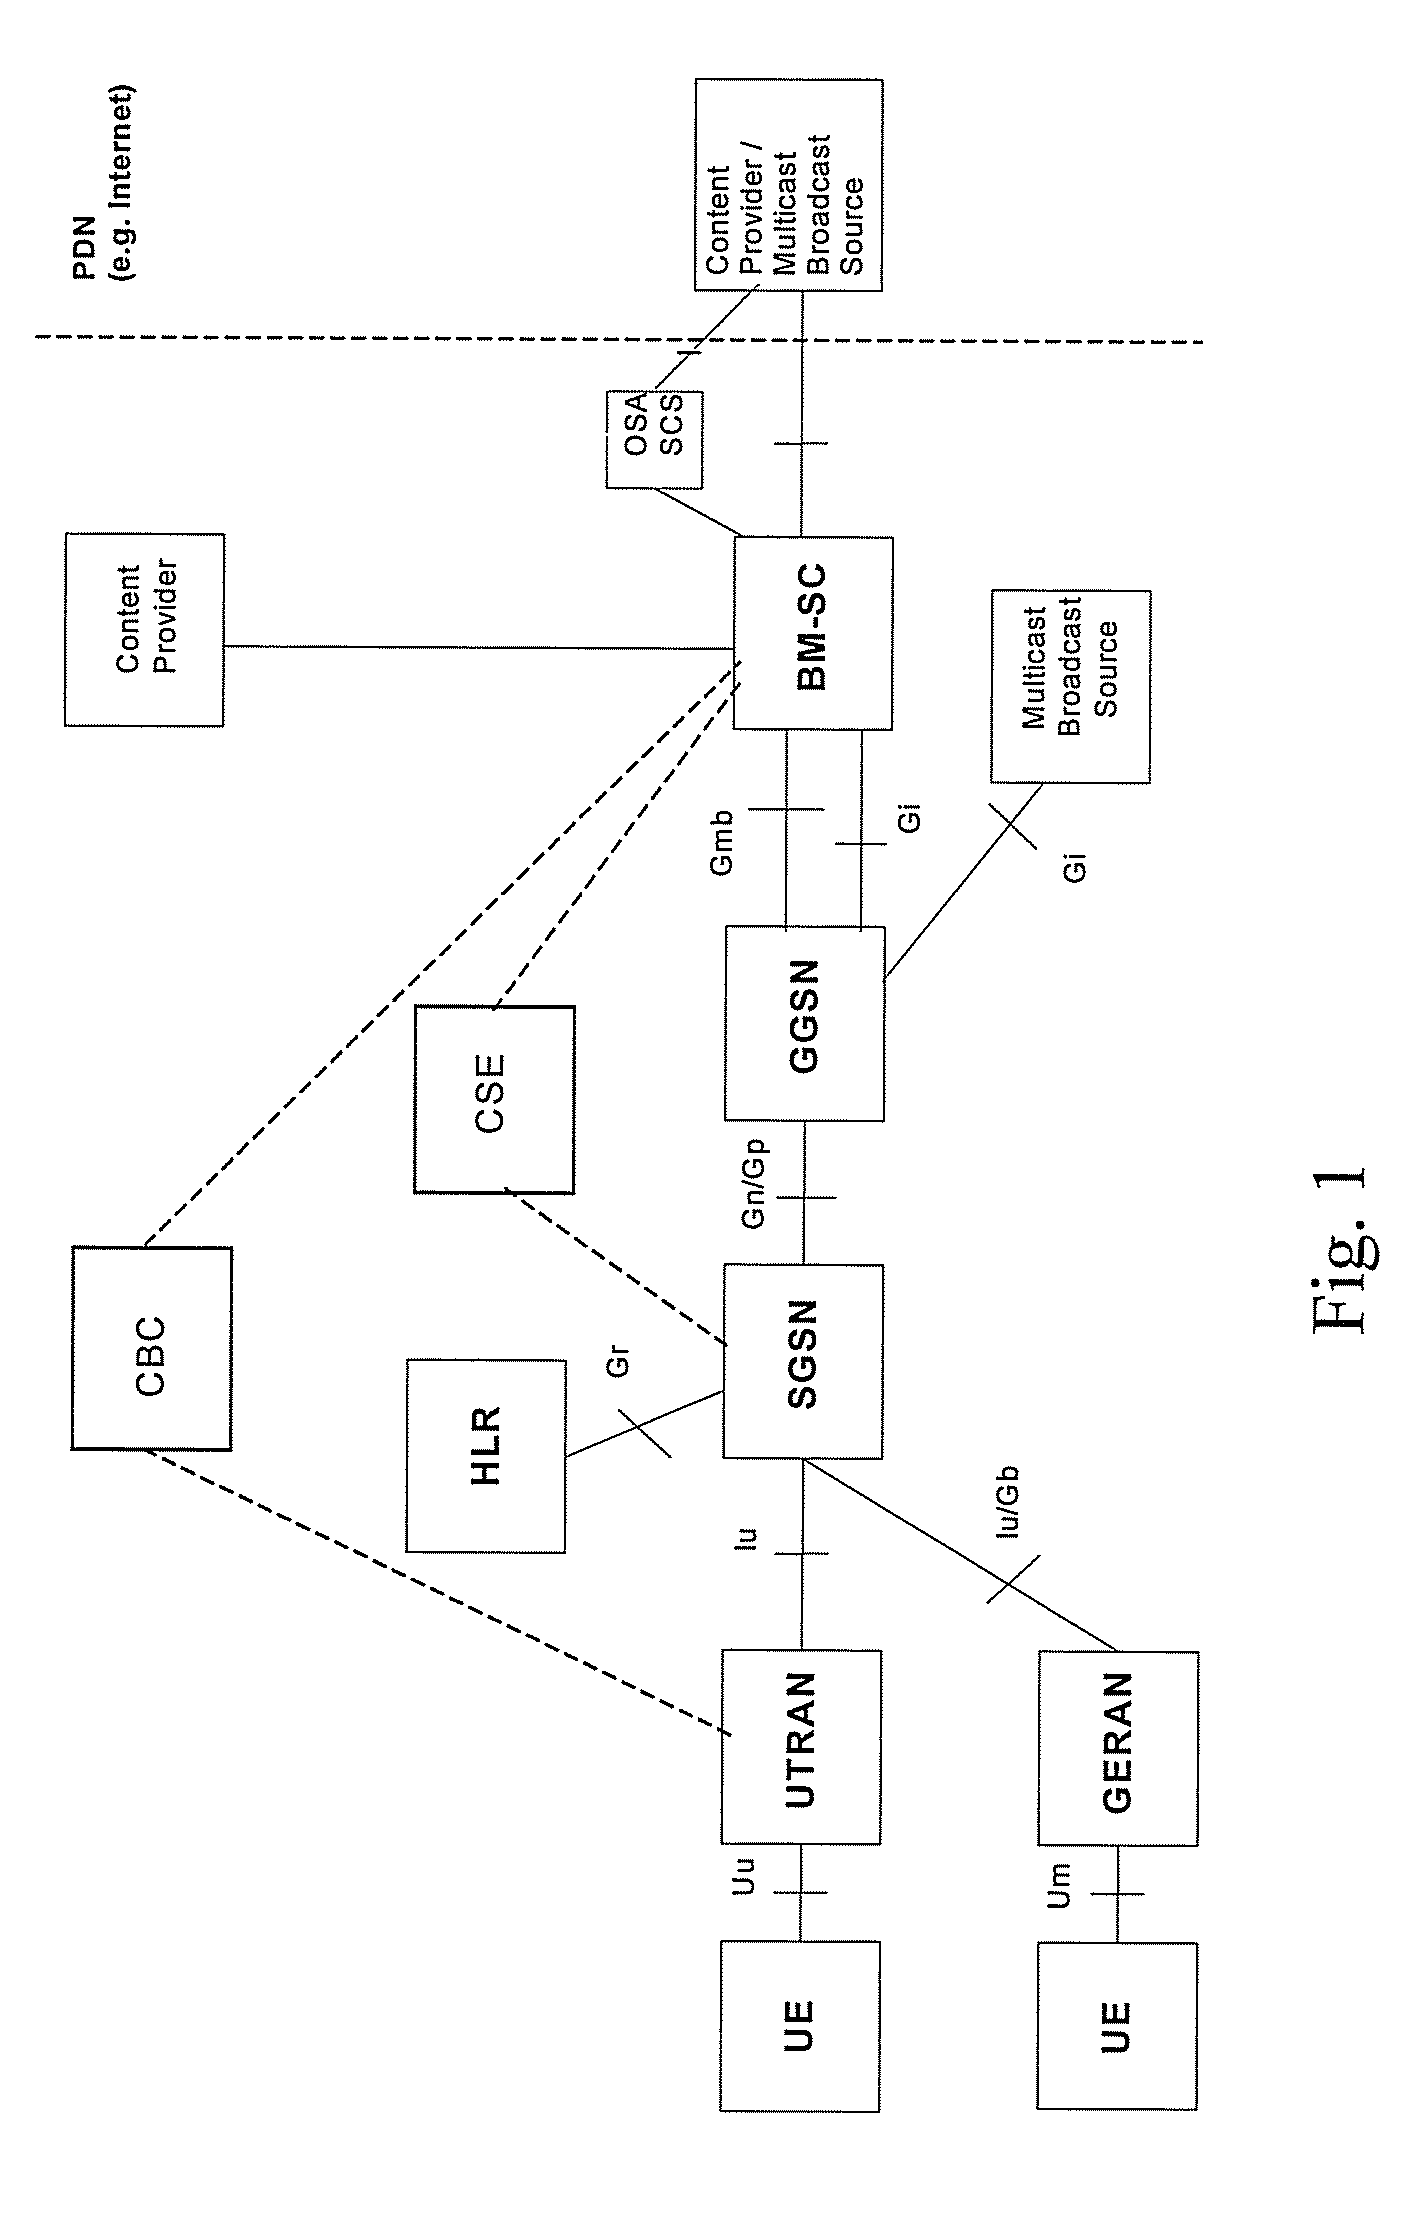 Method for a user equipment performing frequency-layer operations in multimedia broadcast/multicast services